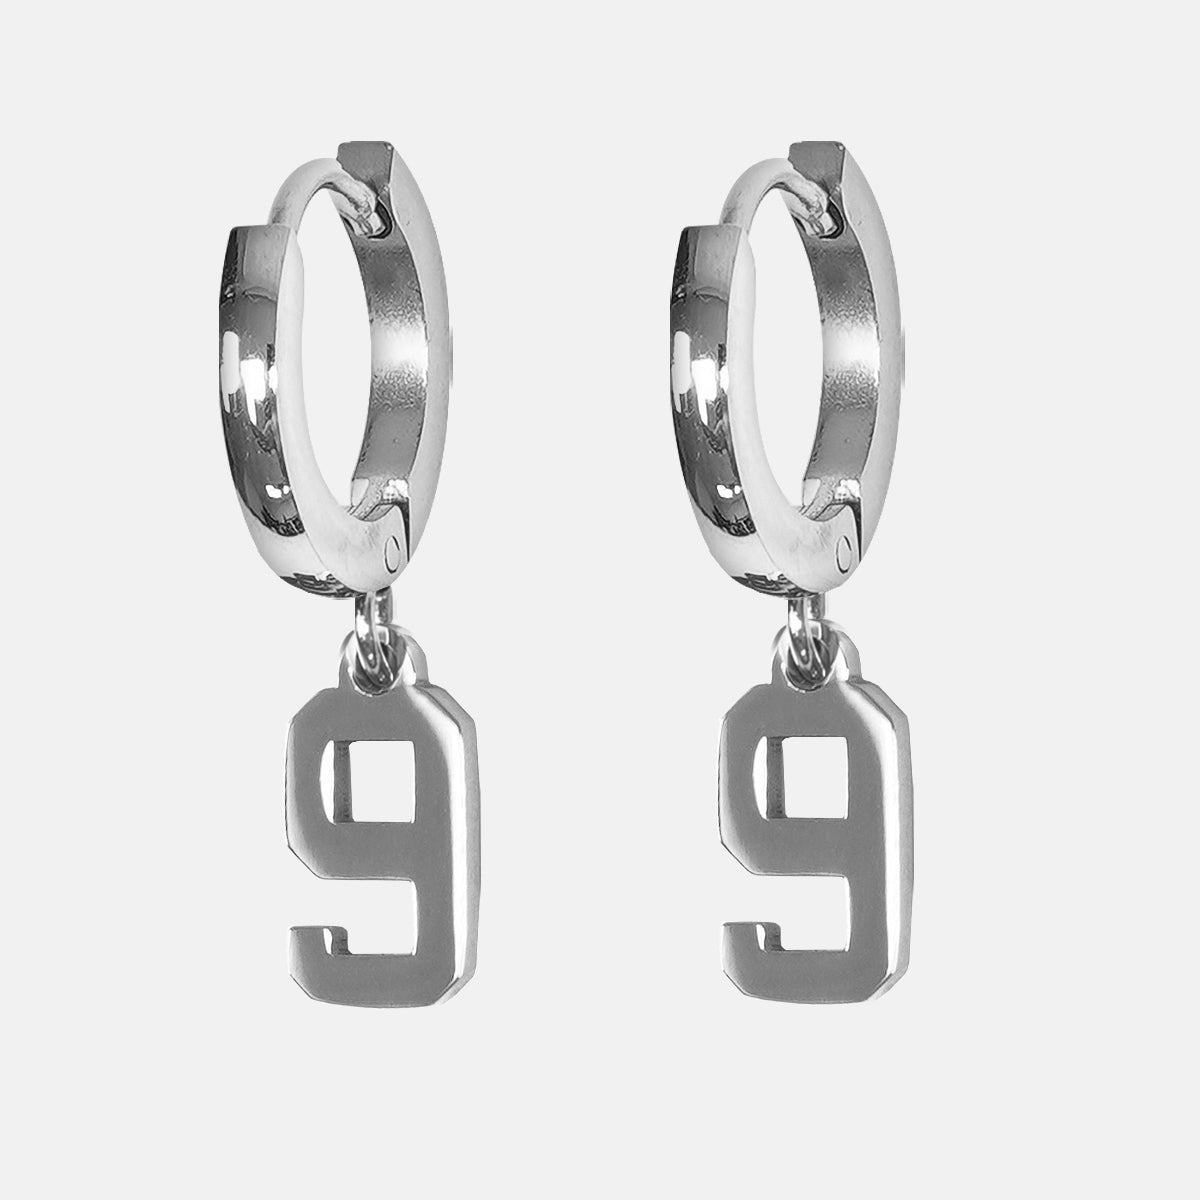 9 Number Earring - Stainless Steel